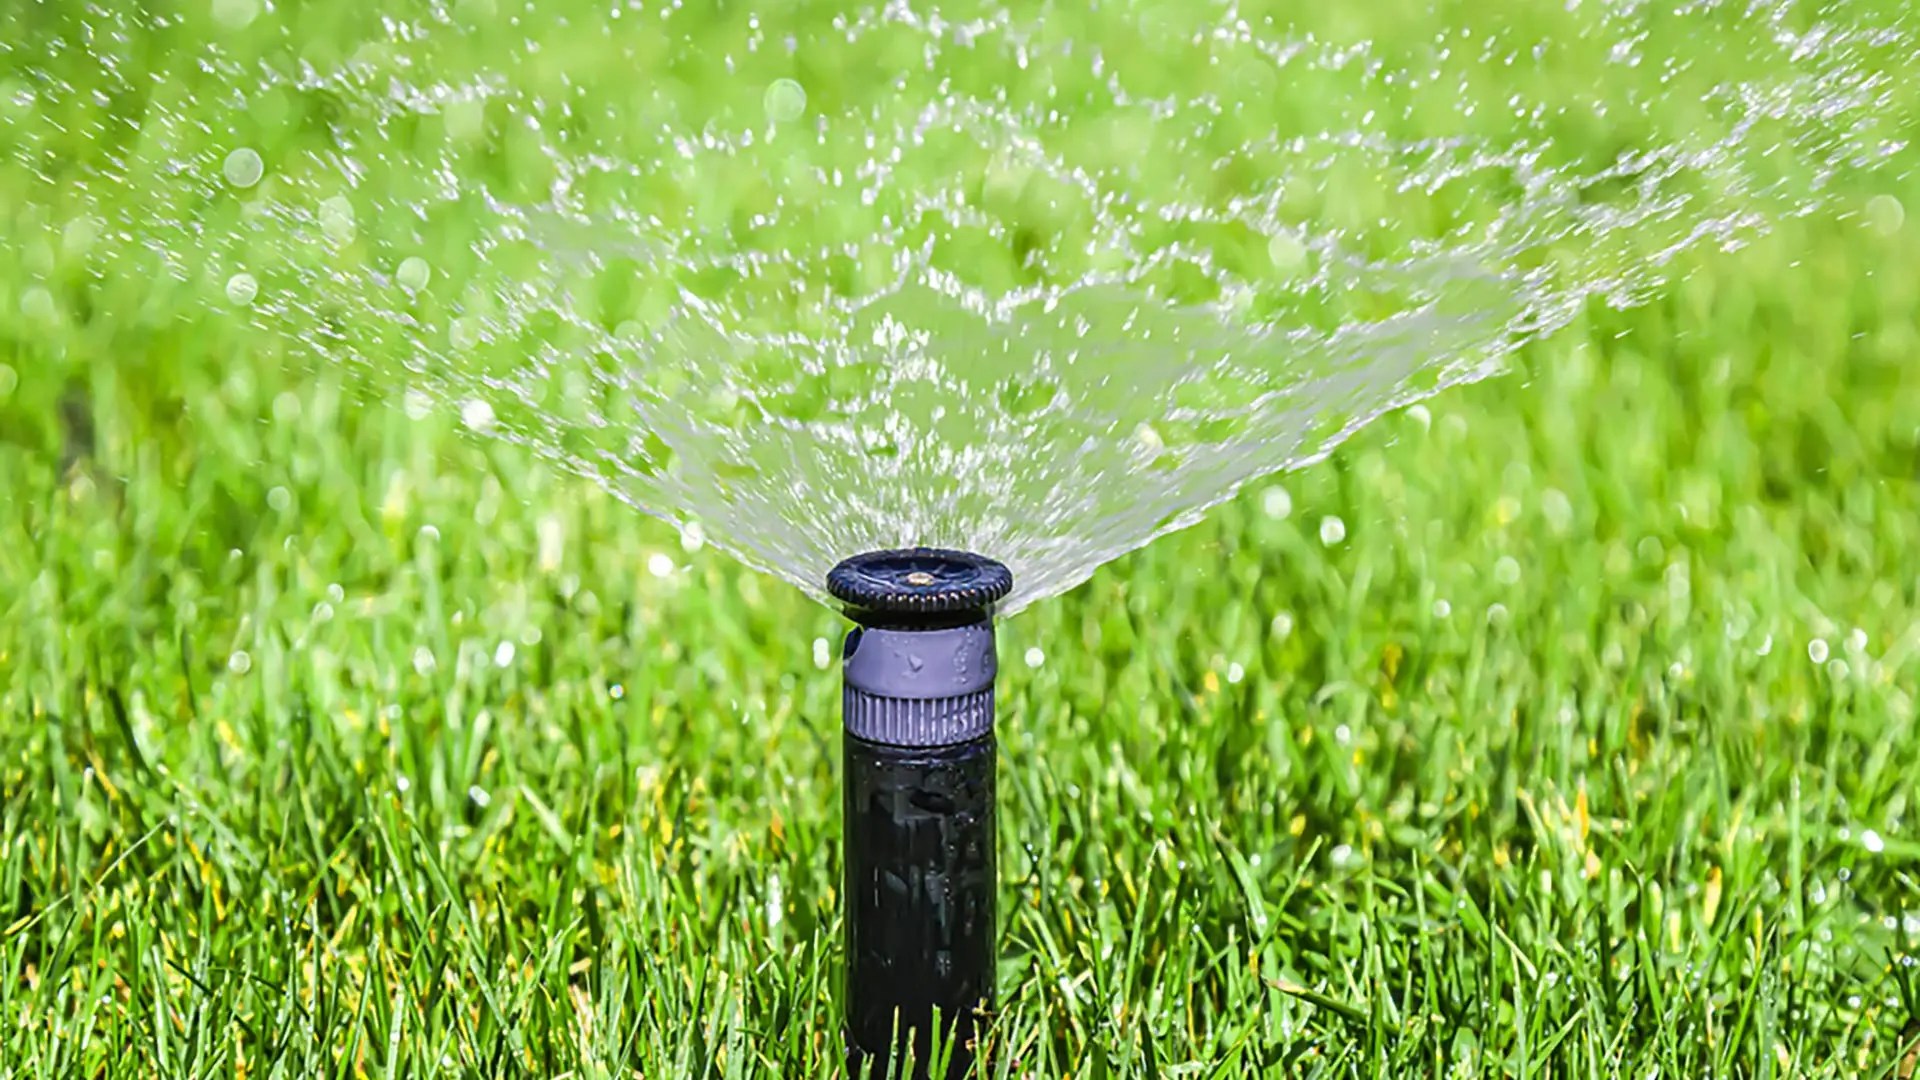 Sprinkler system watering lawn near Columbia, MO.